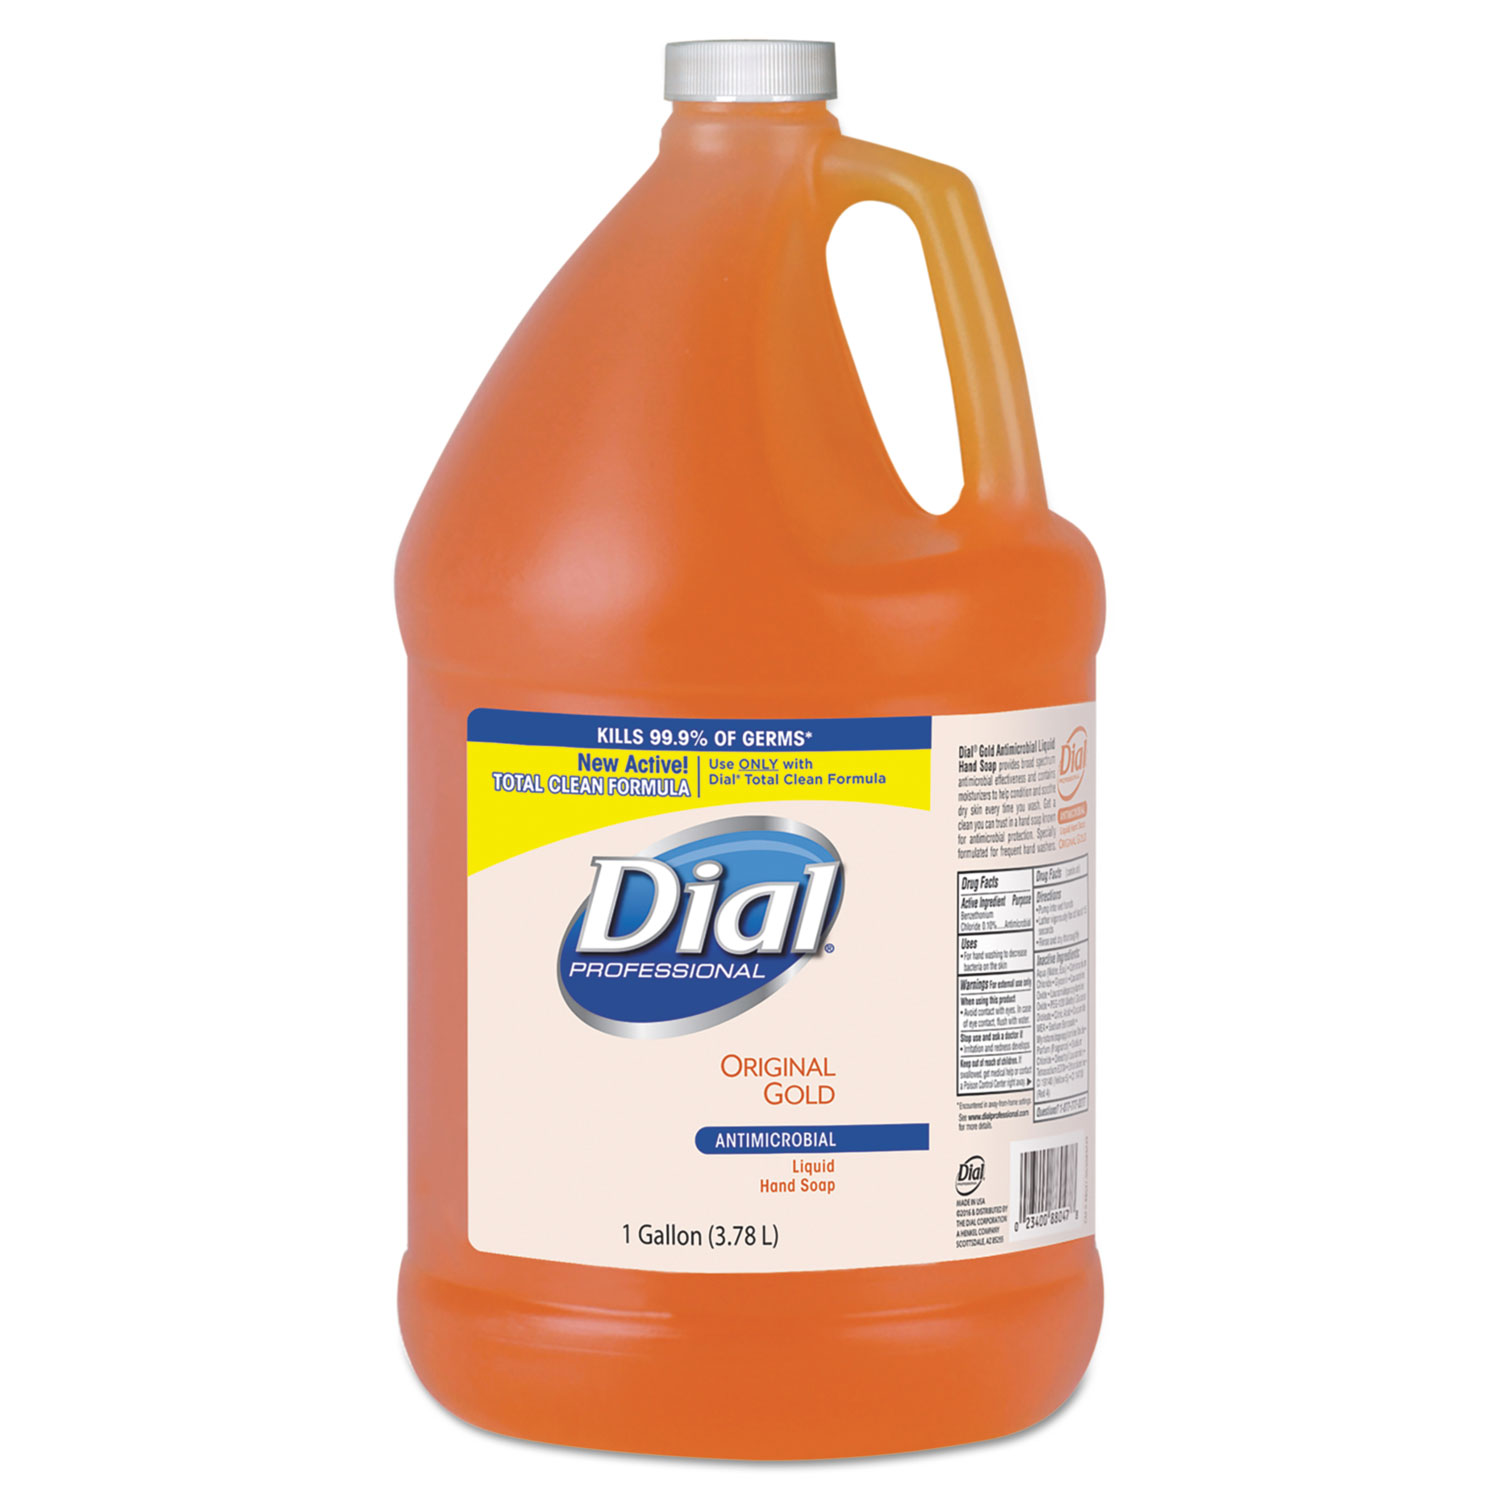 Dial Gold Antimicrobial Liquid Hand Soap - Floral Fragrance, 1 Gallon, 4/Case